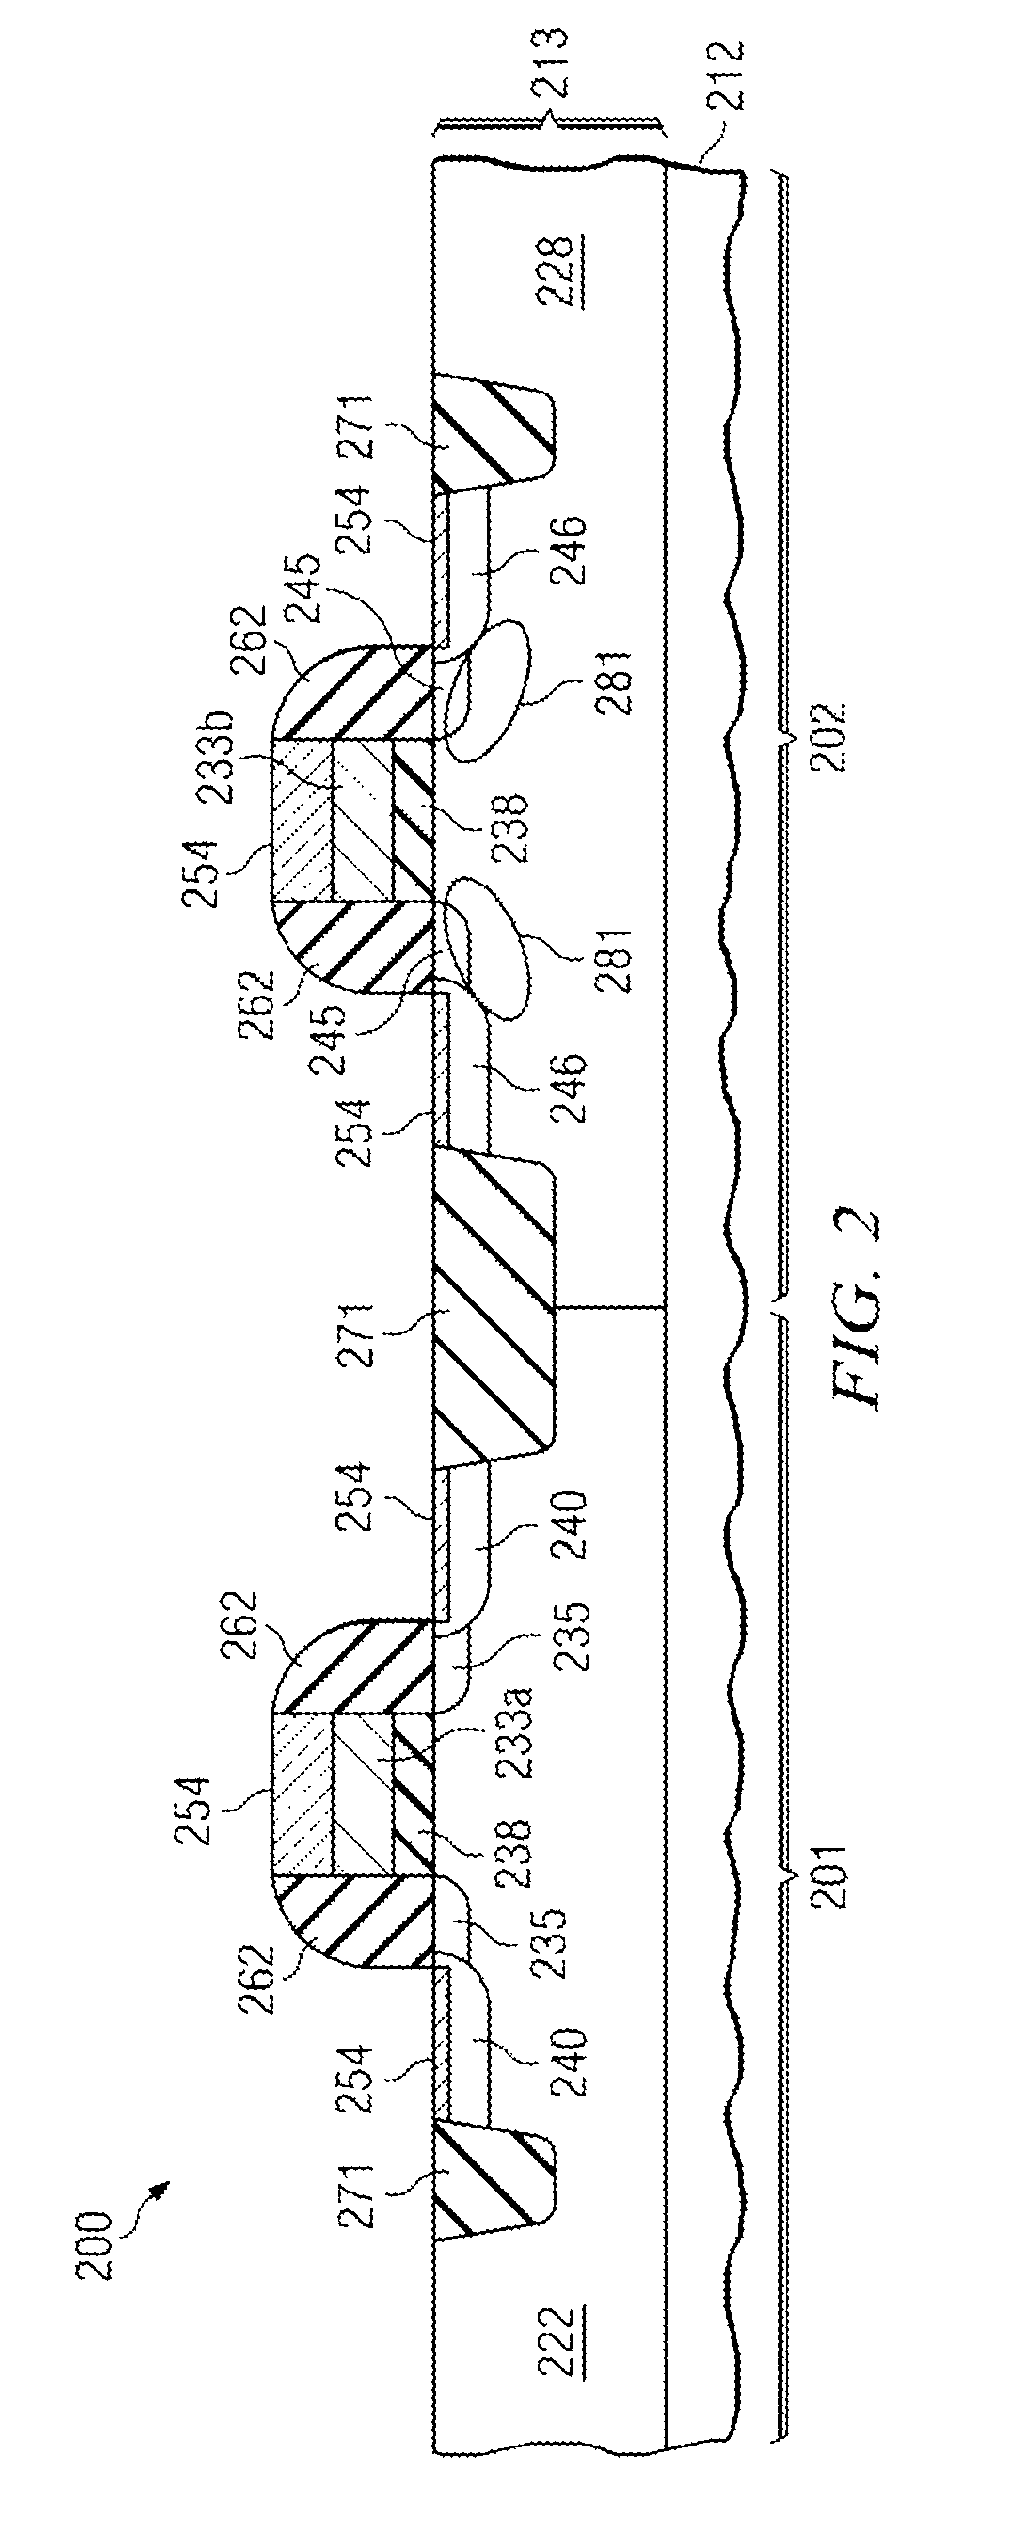 Multiple indium implant methods and devices and integrated circuits therefrom